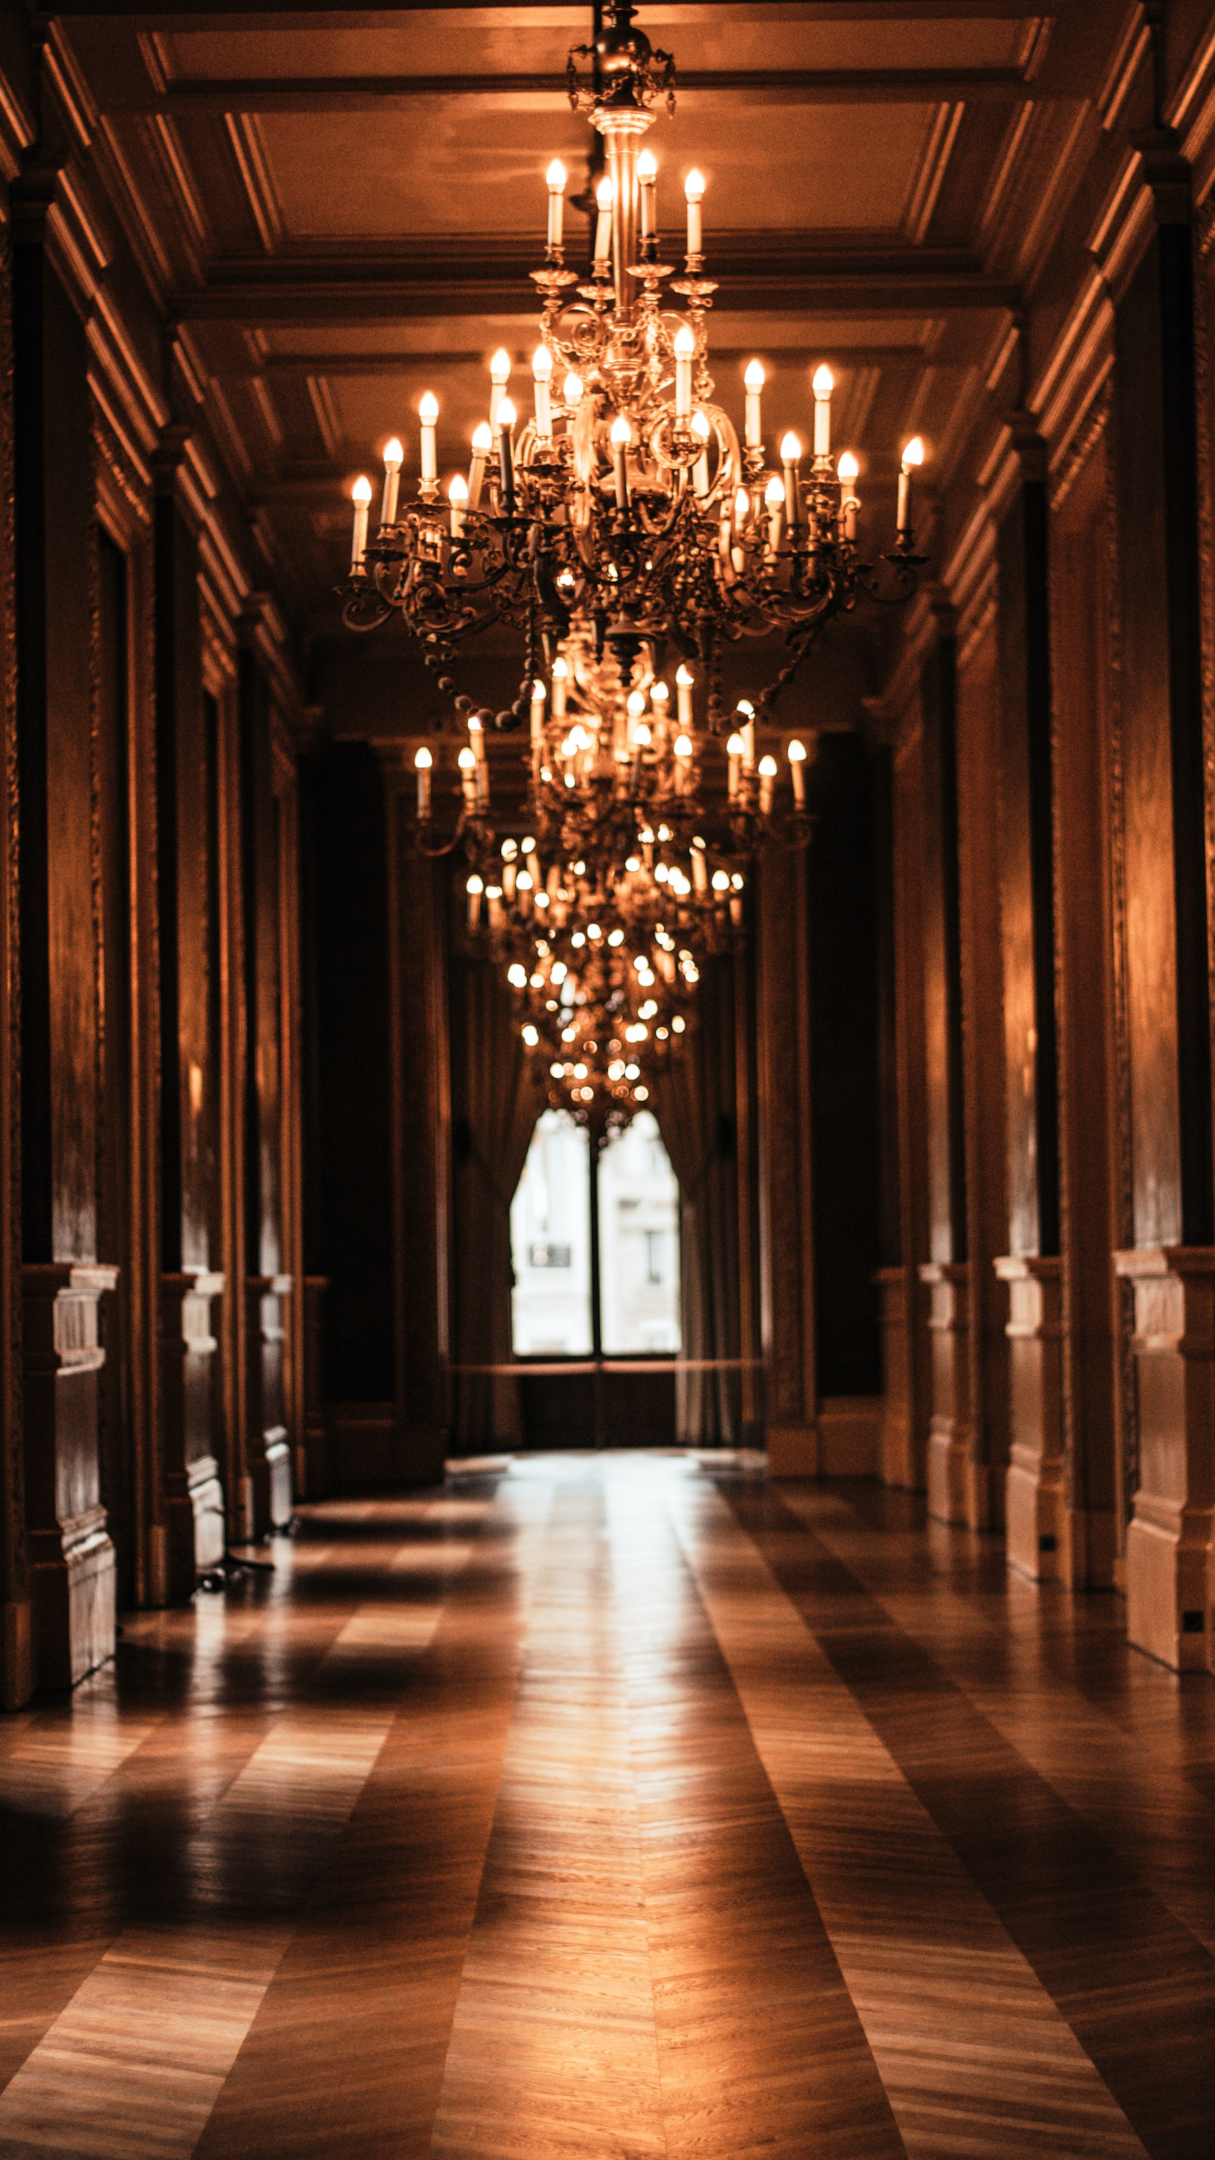 A beautiful chandelier is always a good accent to one's hallway. | Photo from Unsplash